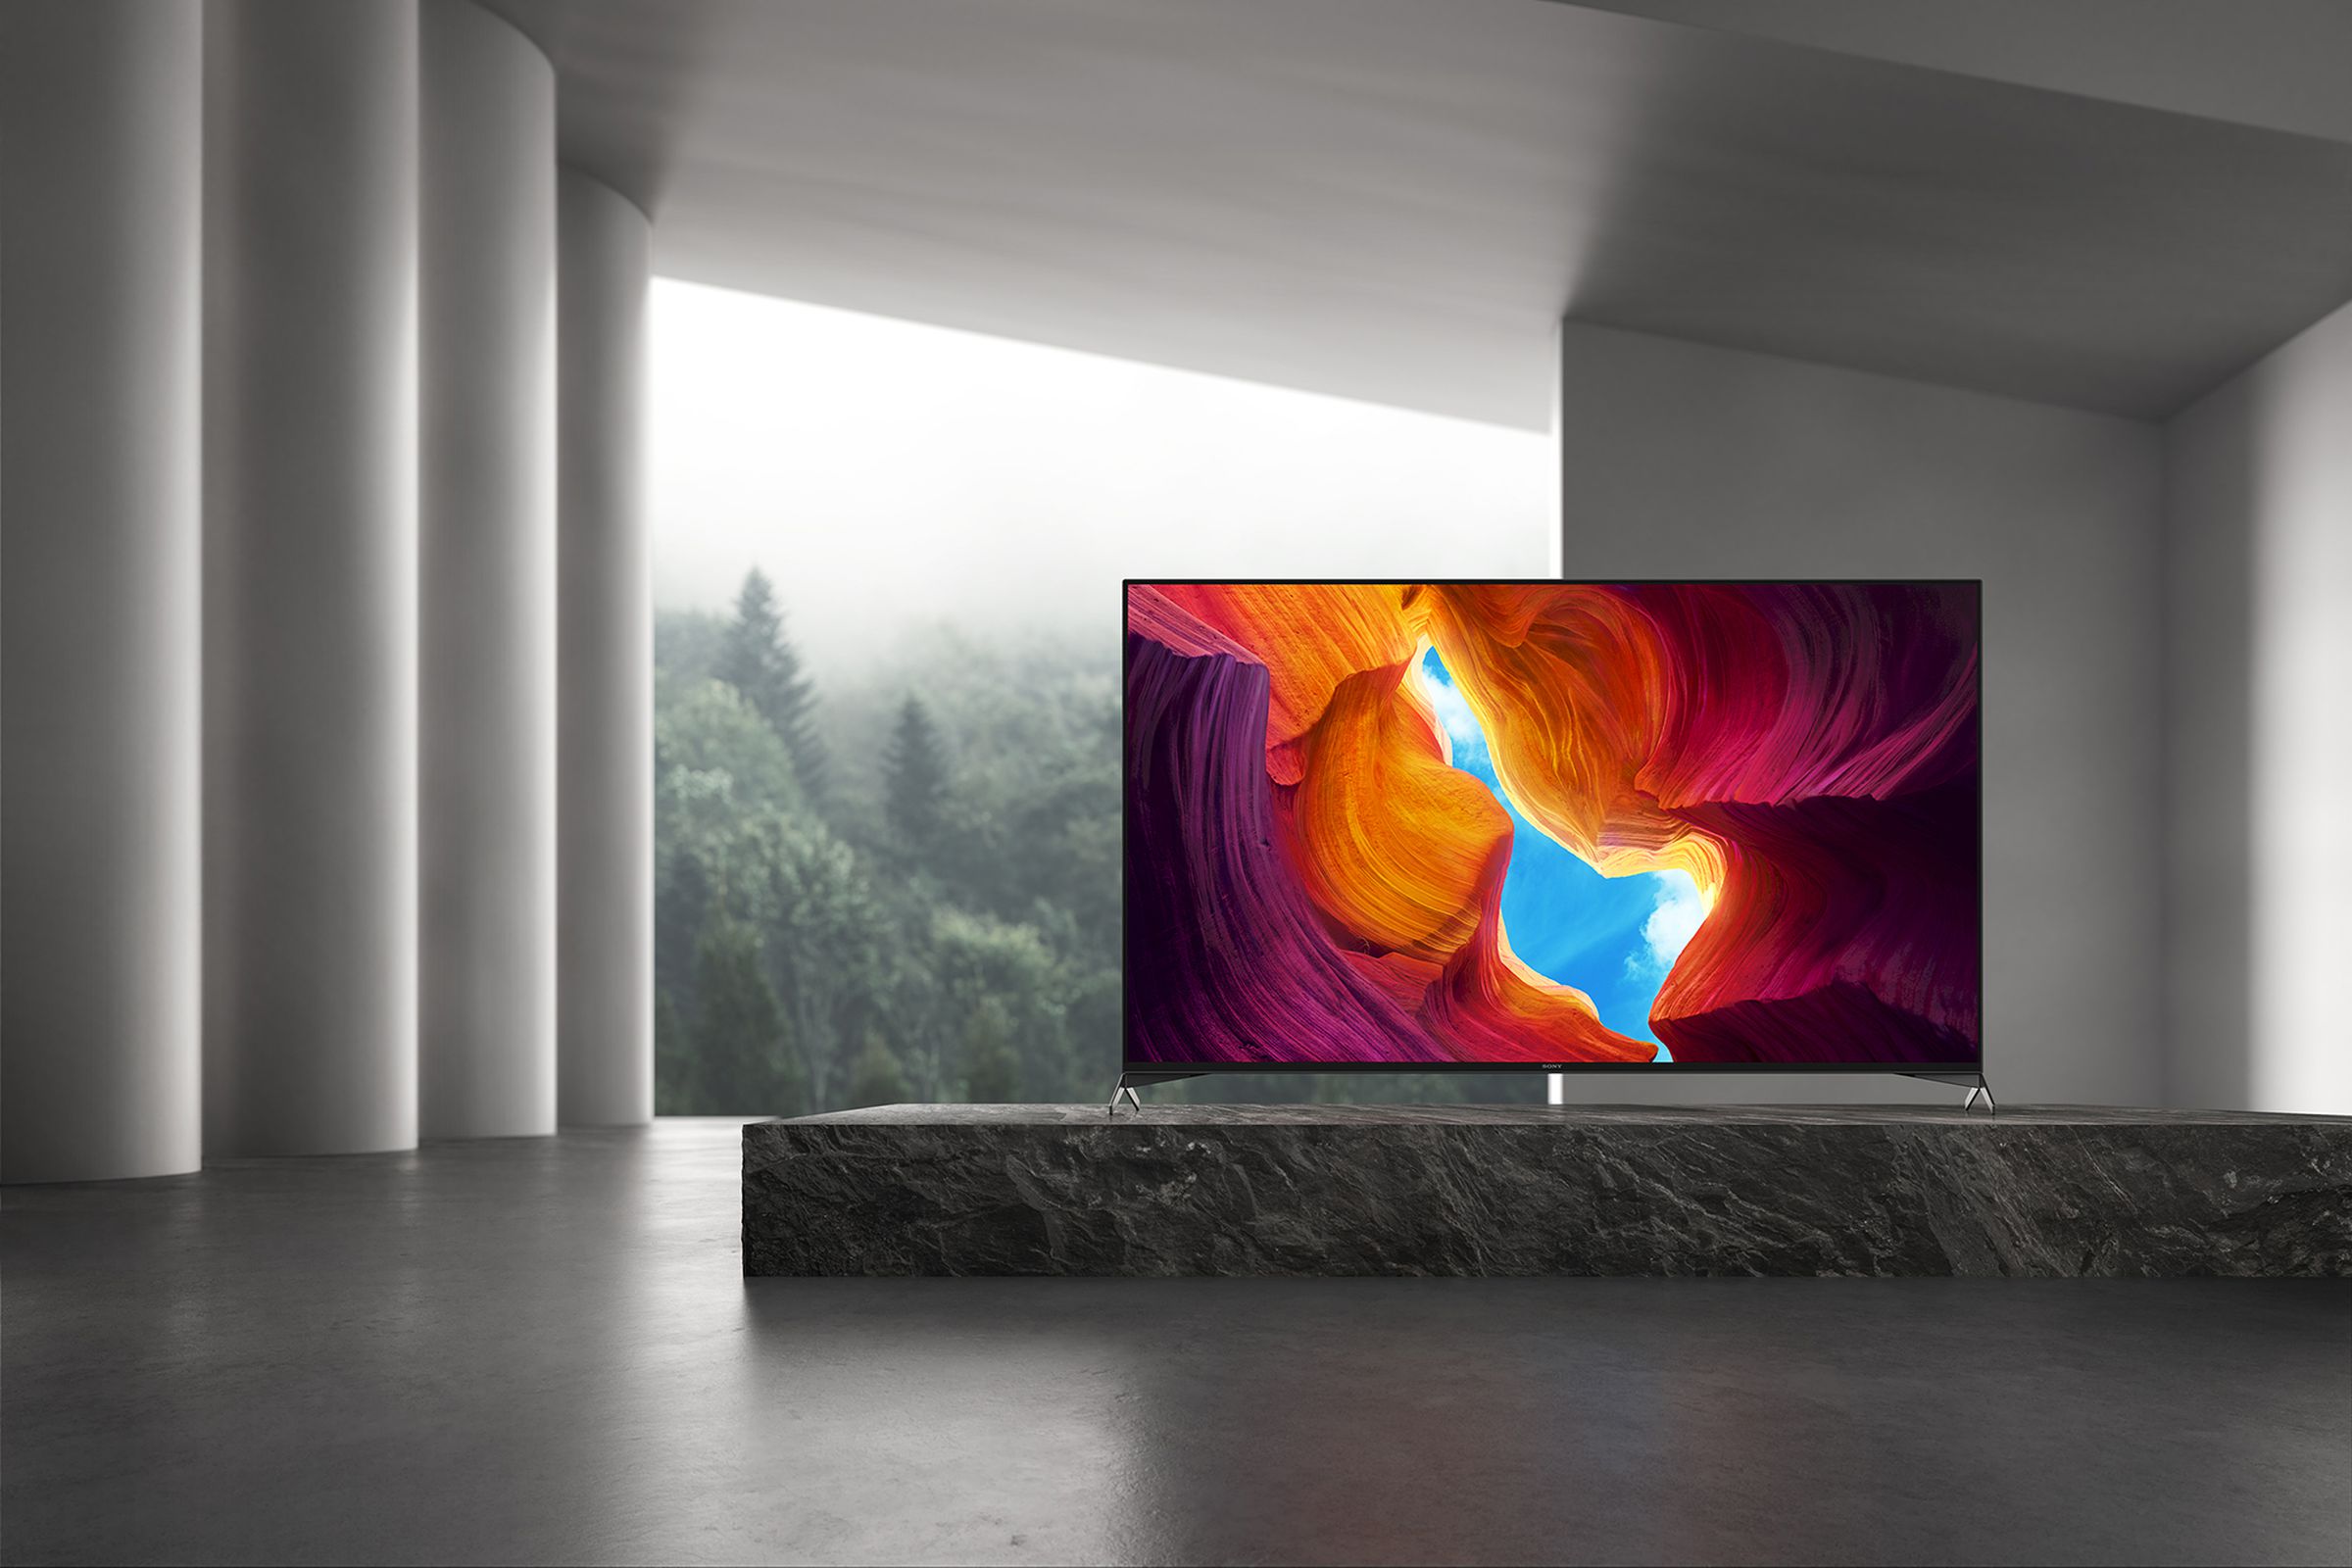 Each model in Sony’s X950H series is known for its impressive color accuracy and wide viewing angles.